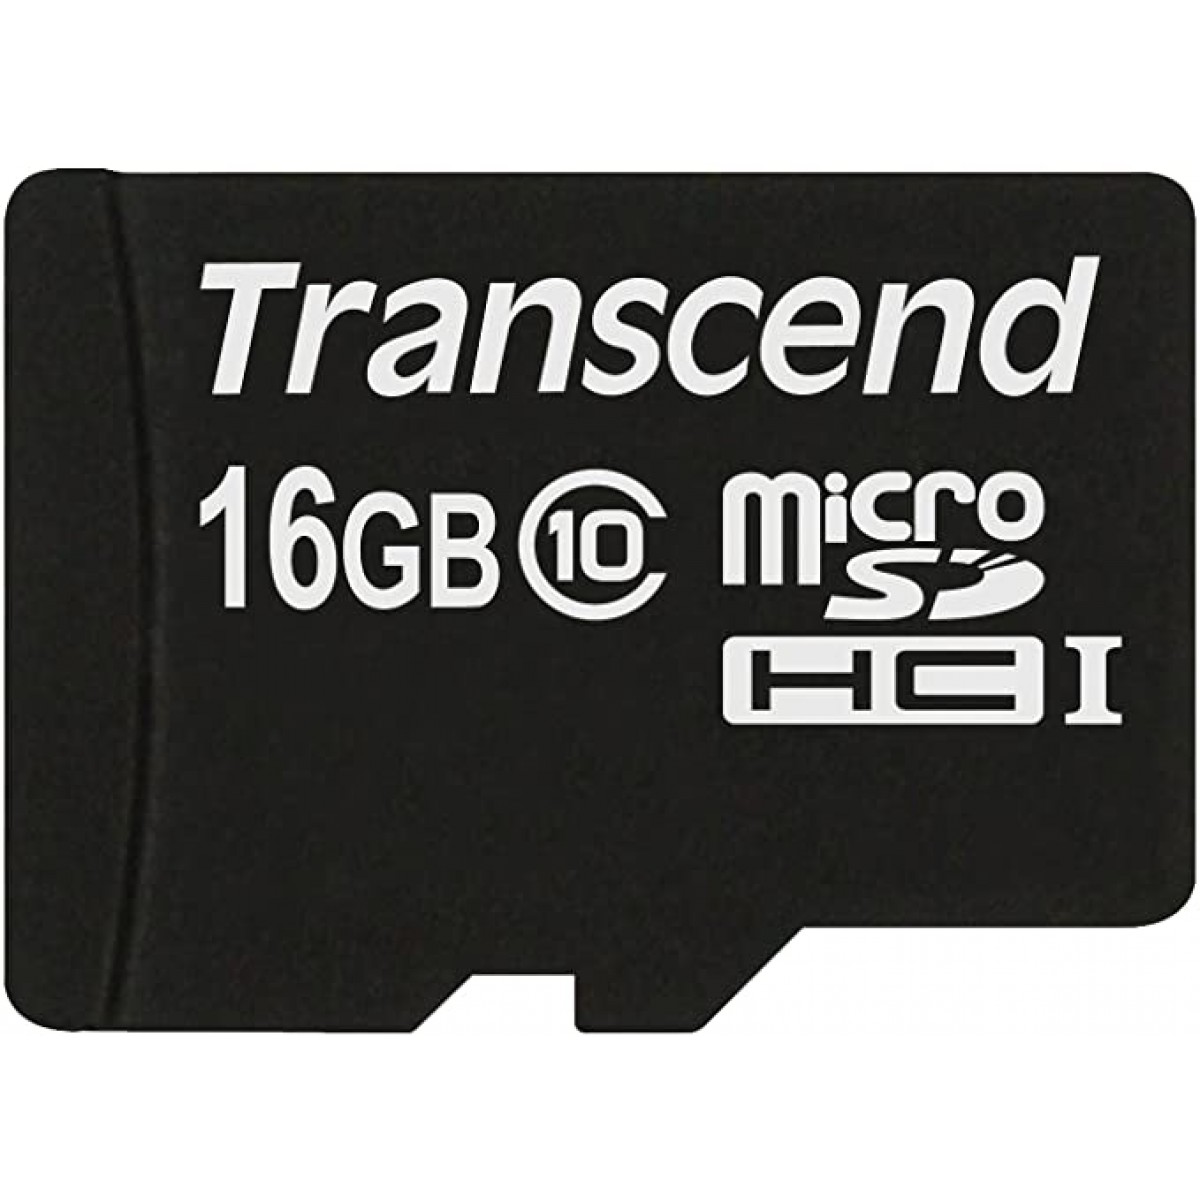 MICRO SDHC TRANSCEND 16GB CLASS 10 WITH ADAPTER TS16GUSDHC10